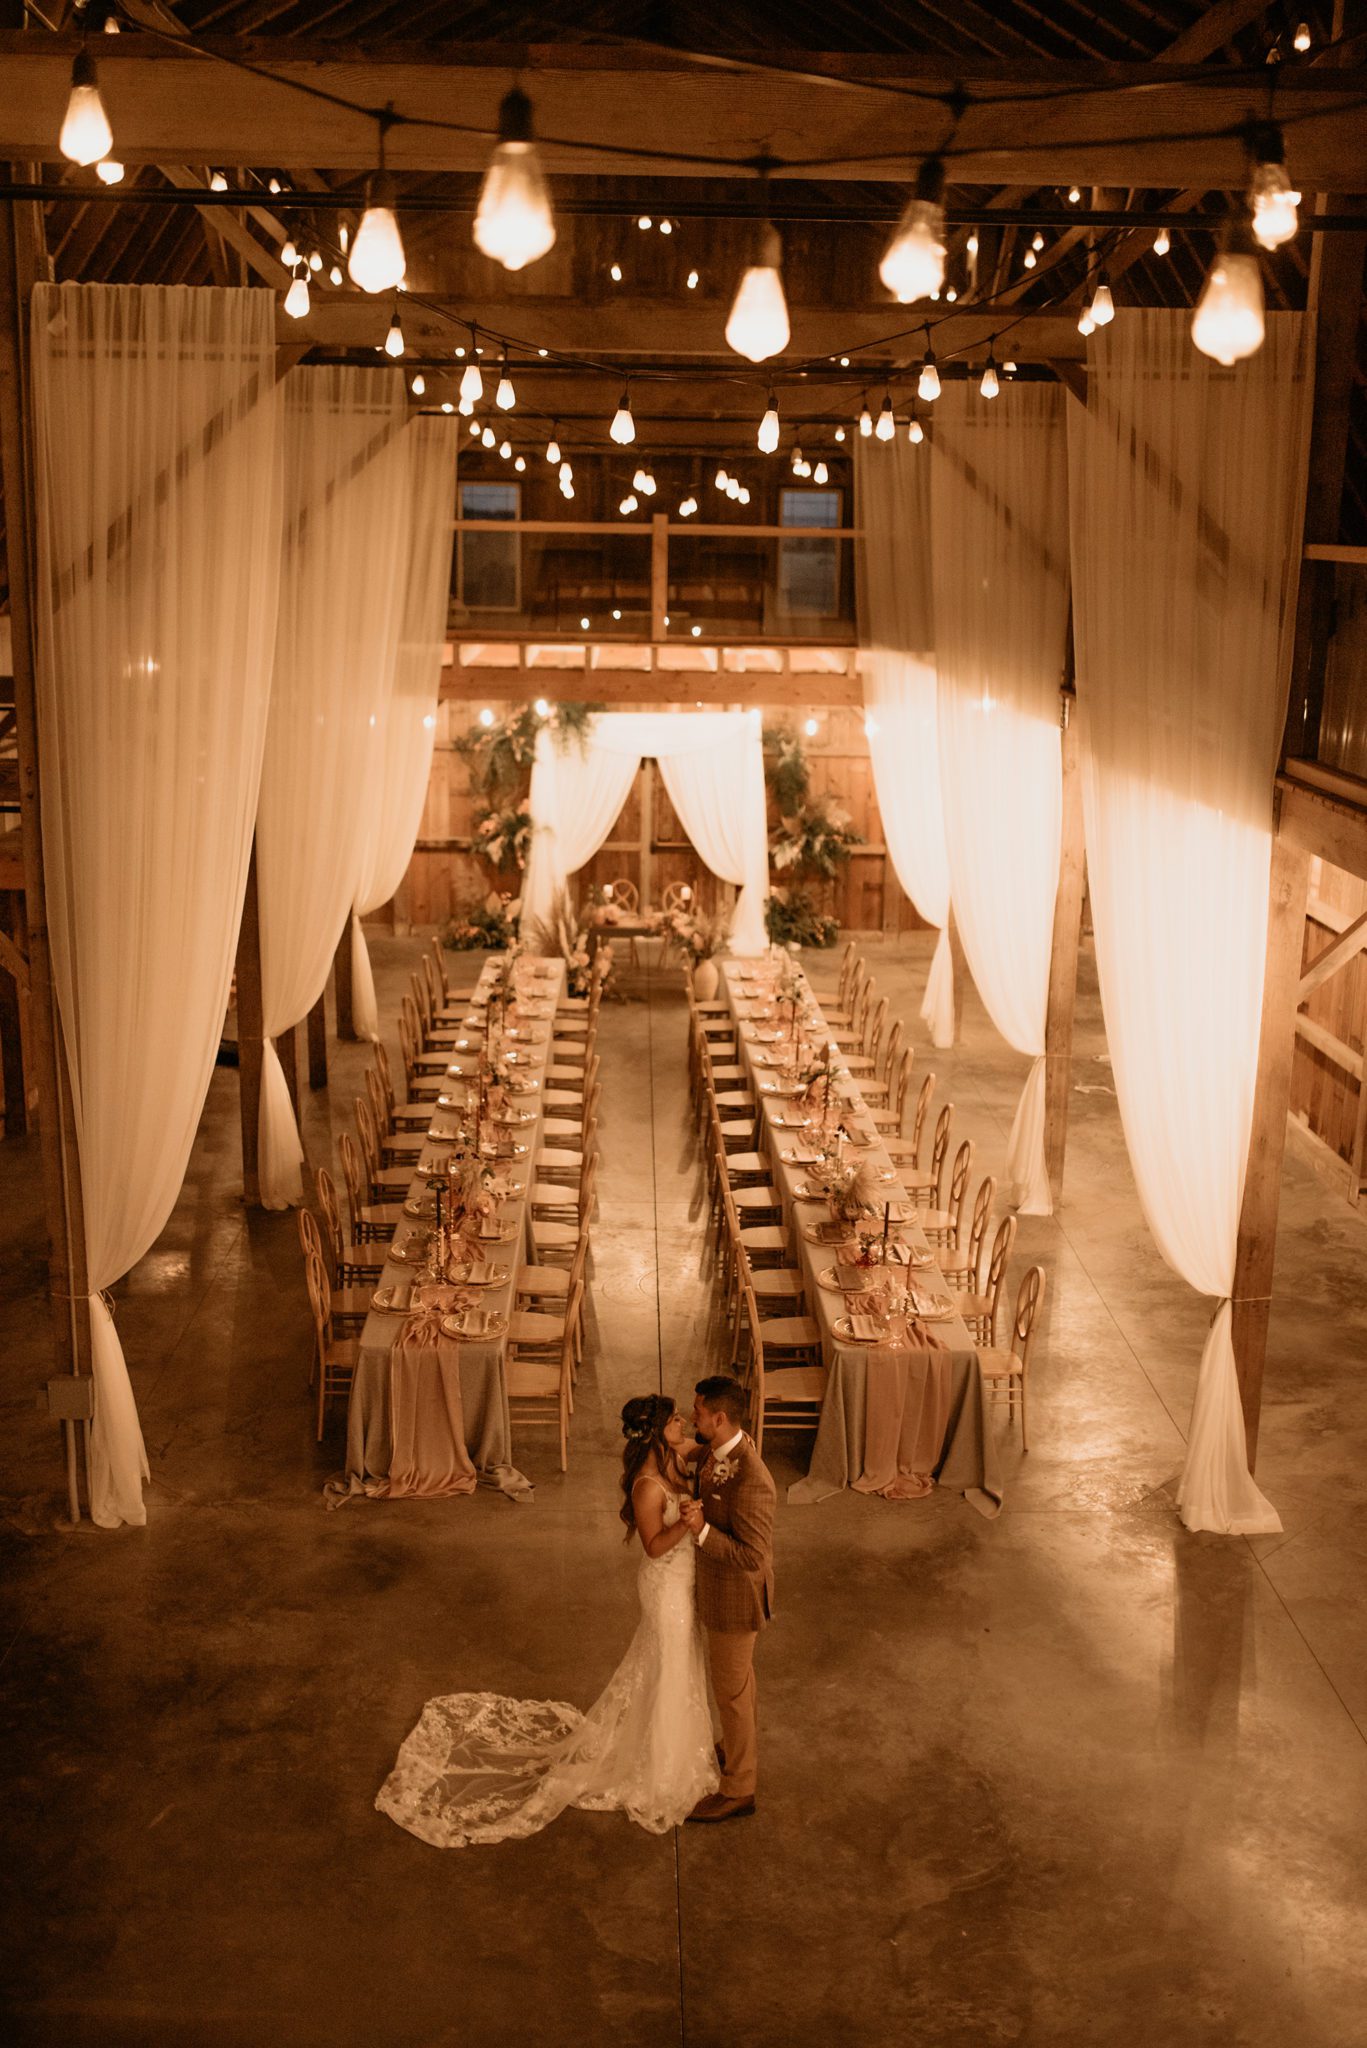 Vintage Boho Meets Western Chic in This Countryside Barn Wedding Inspiration